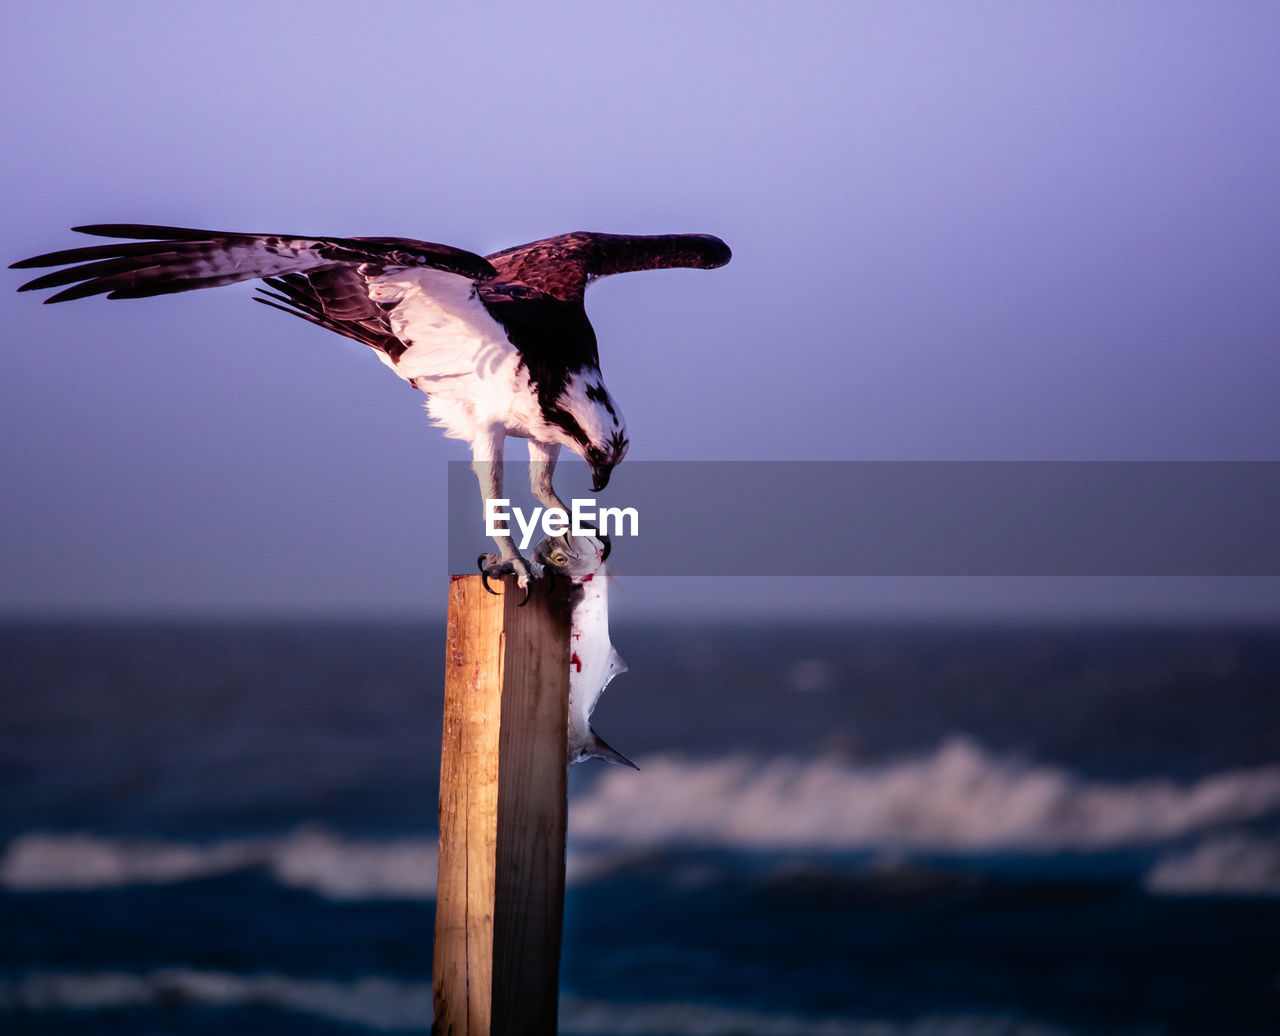 Bird with prey on wooden post against sky